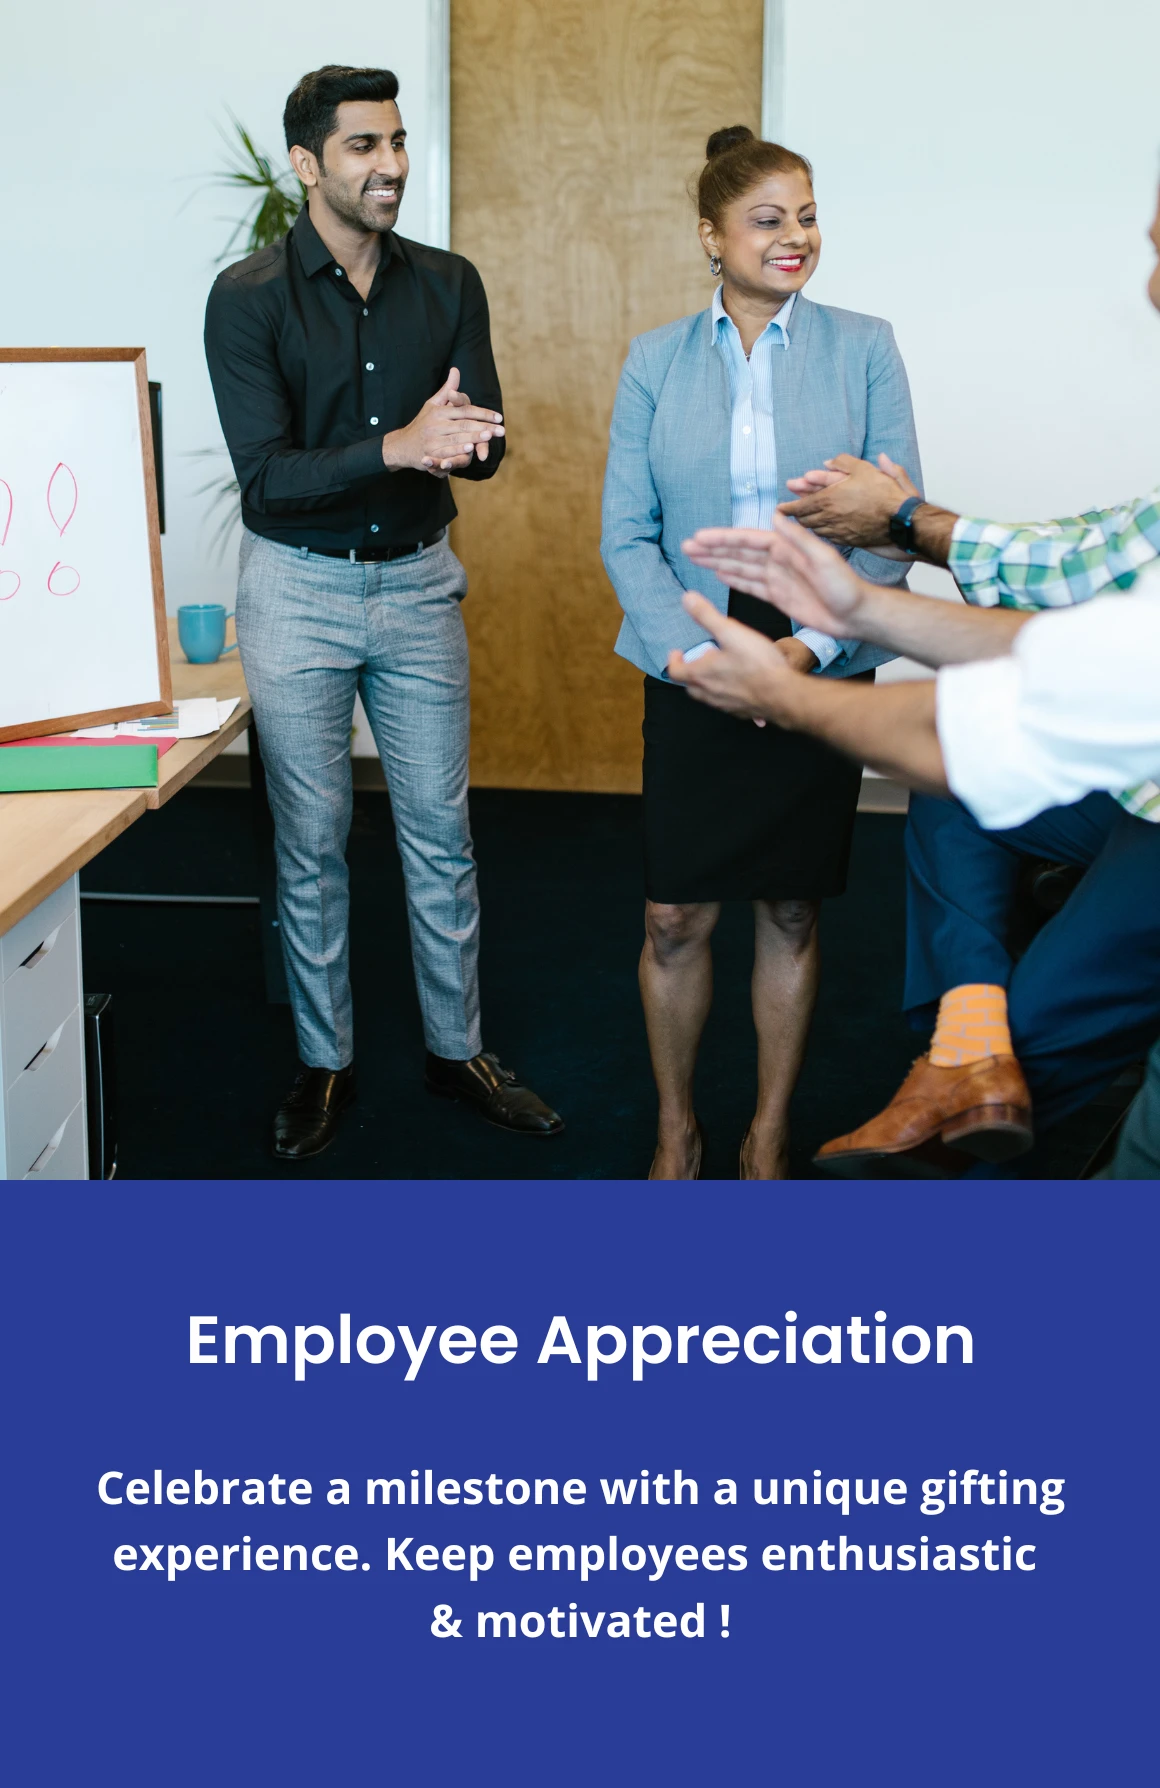 Employee Appreciation| Corporate Gifts